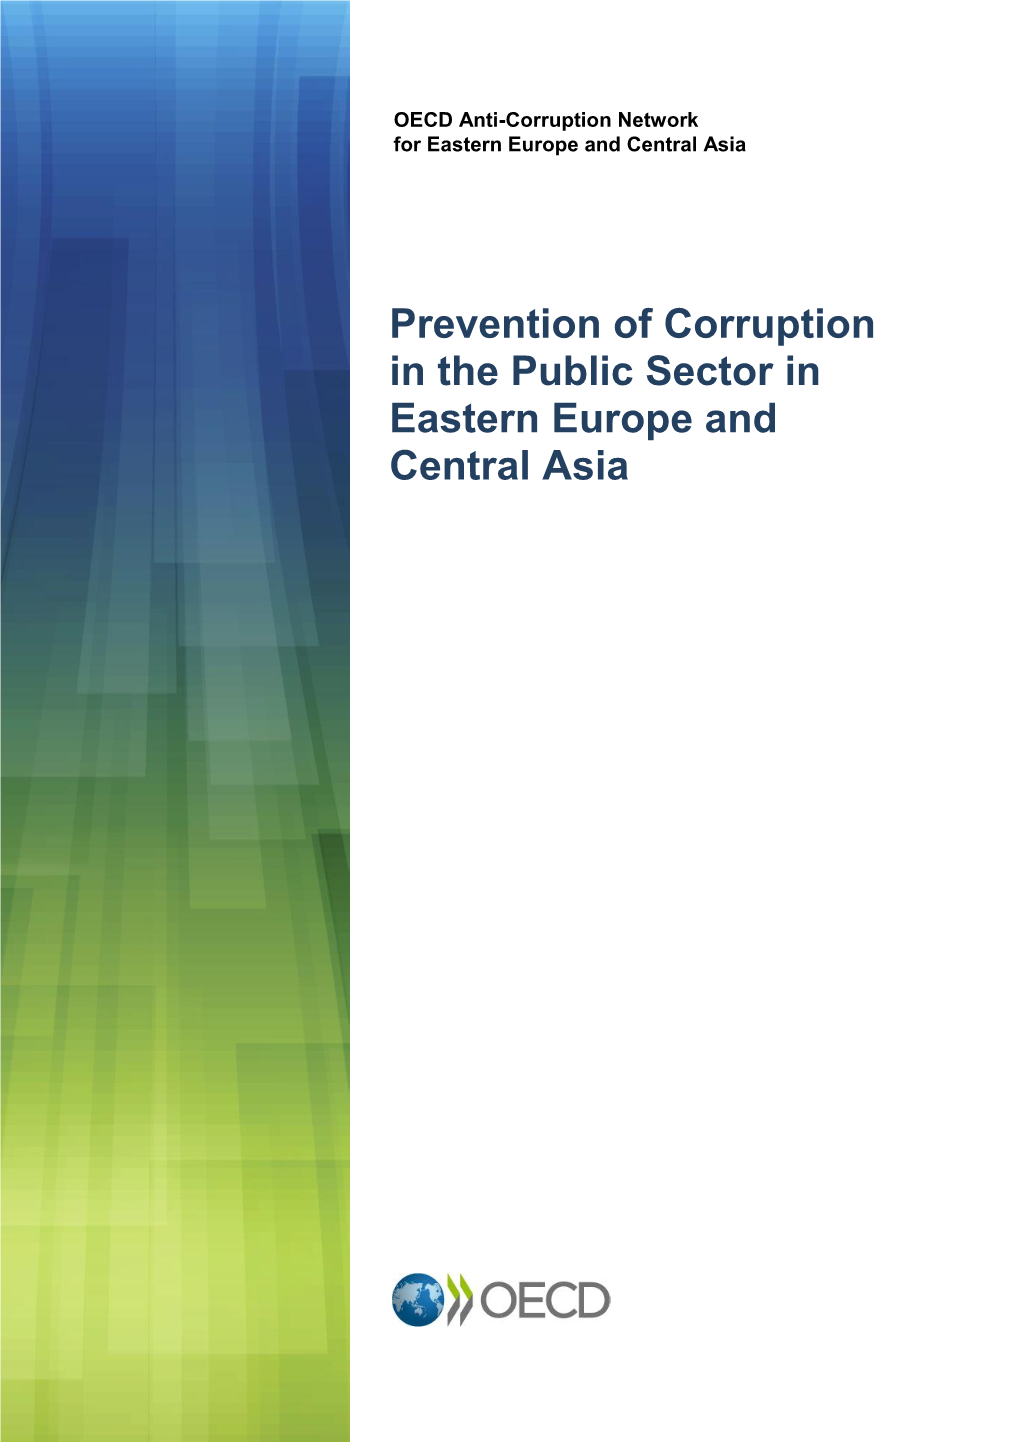 Prevention of Corruption in the Public Sector in Eastern Europe and Central Asia